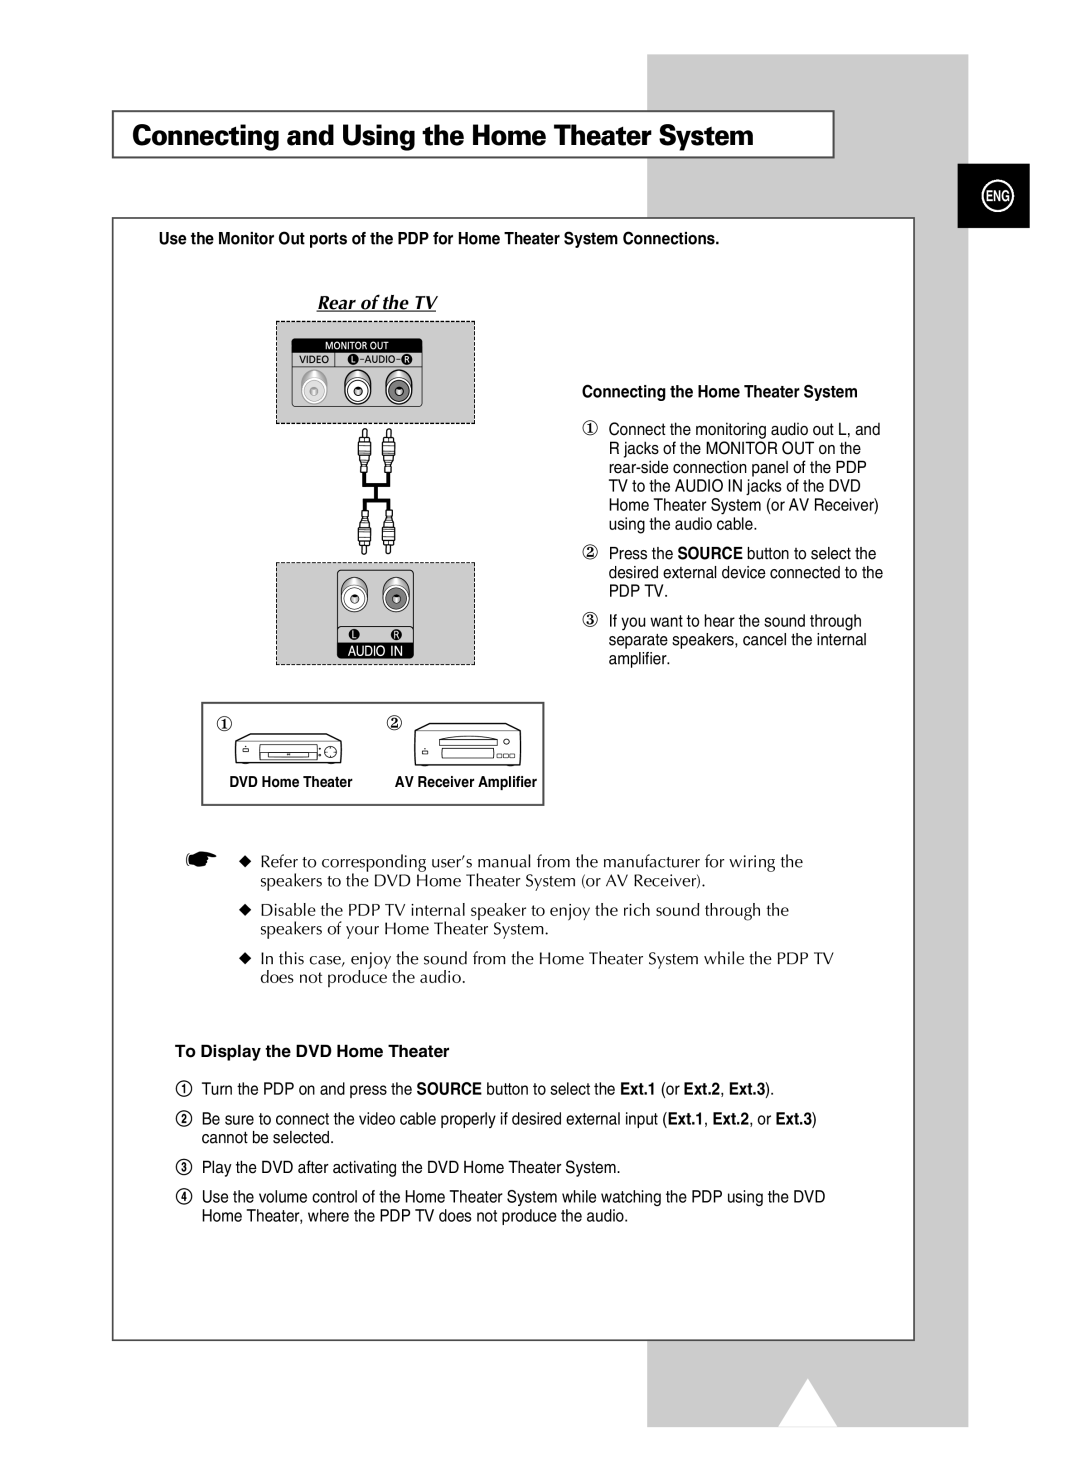 Samsung PS-37S4A1 manual Connecting and Using the Home Theater System, Connecting the Home Theater System, Rear of the TV 